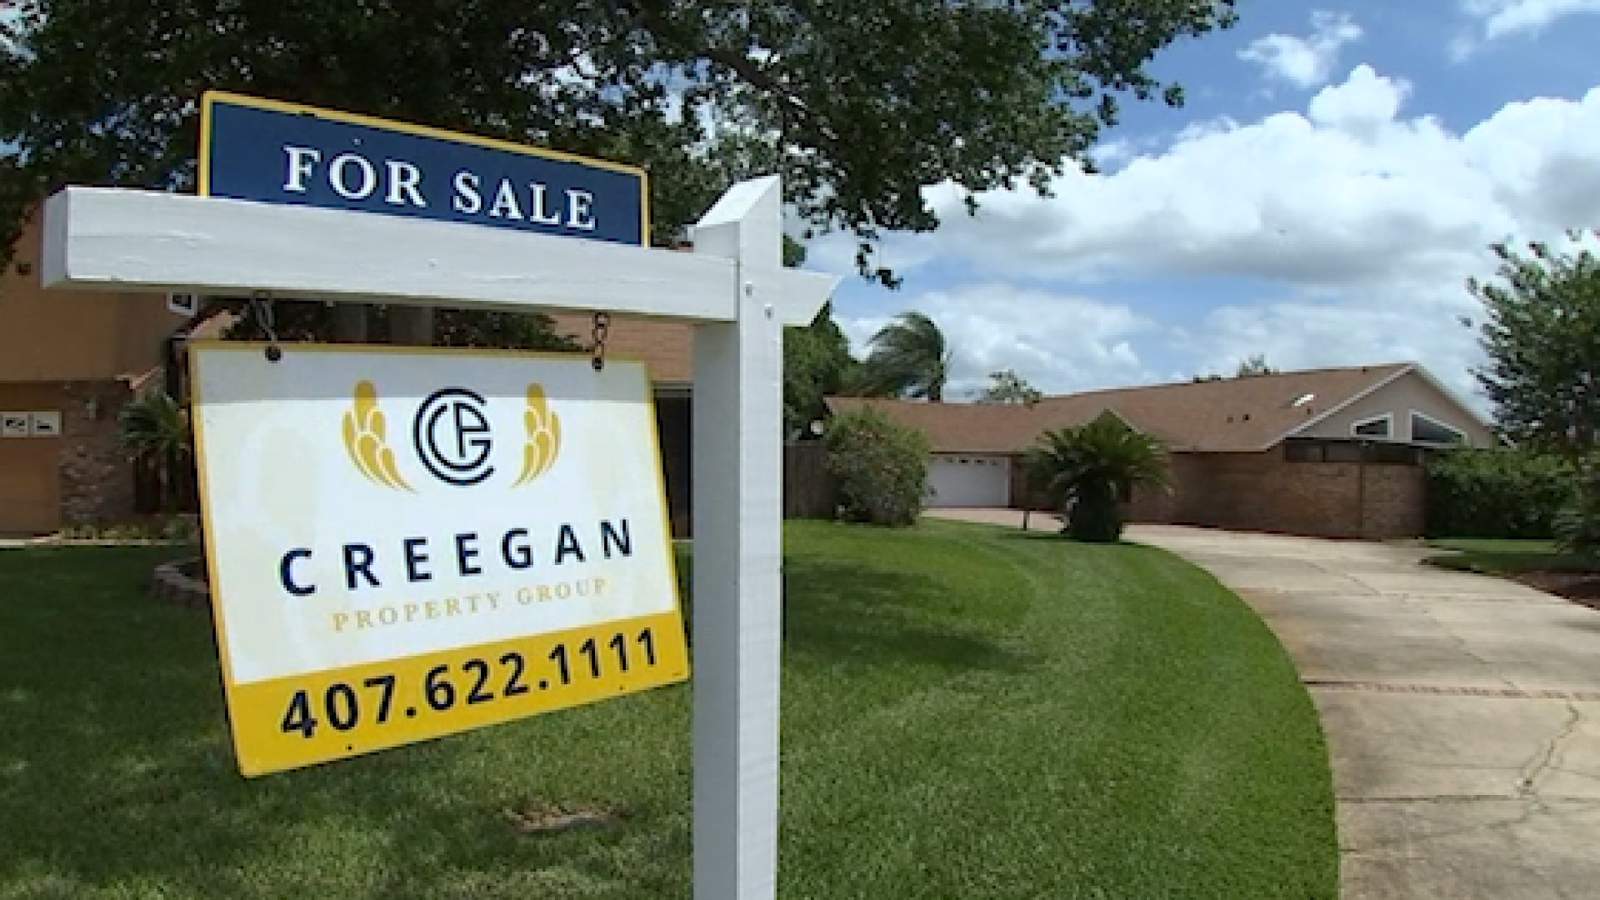 Here’s how the coronavirus is affecting Central Florida’s real estate market